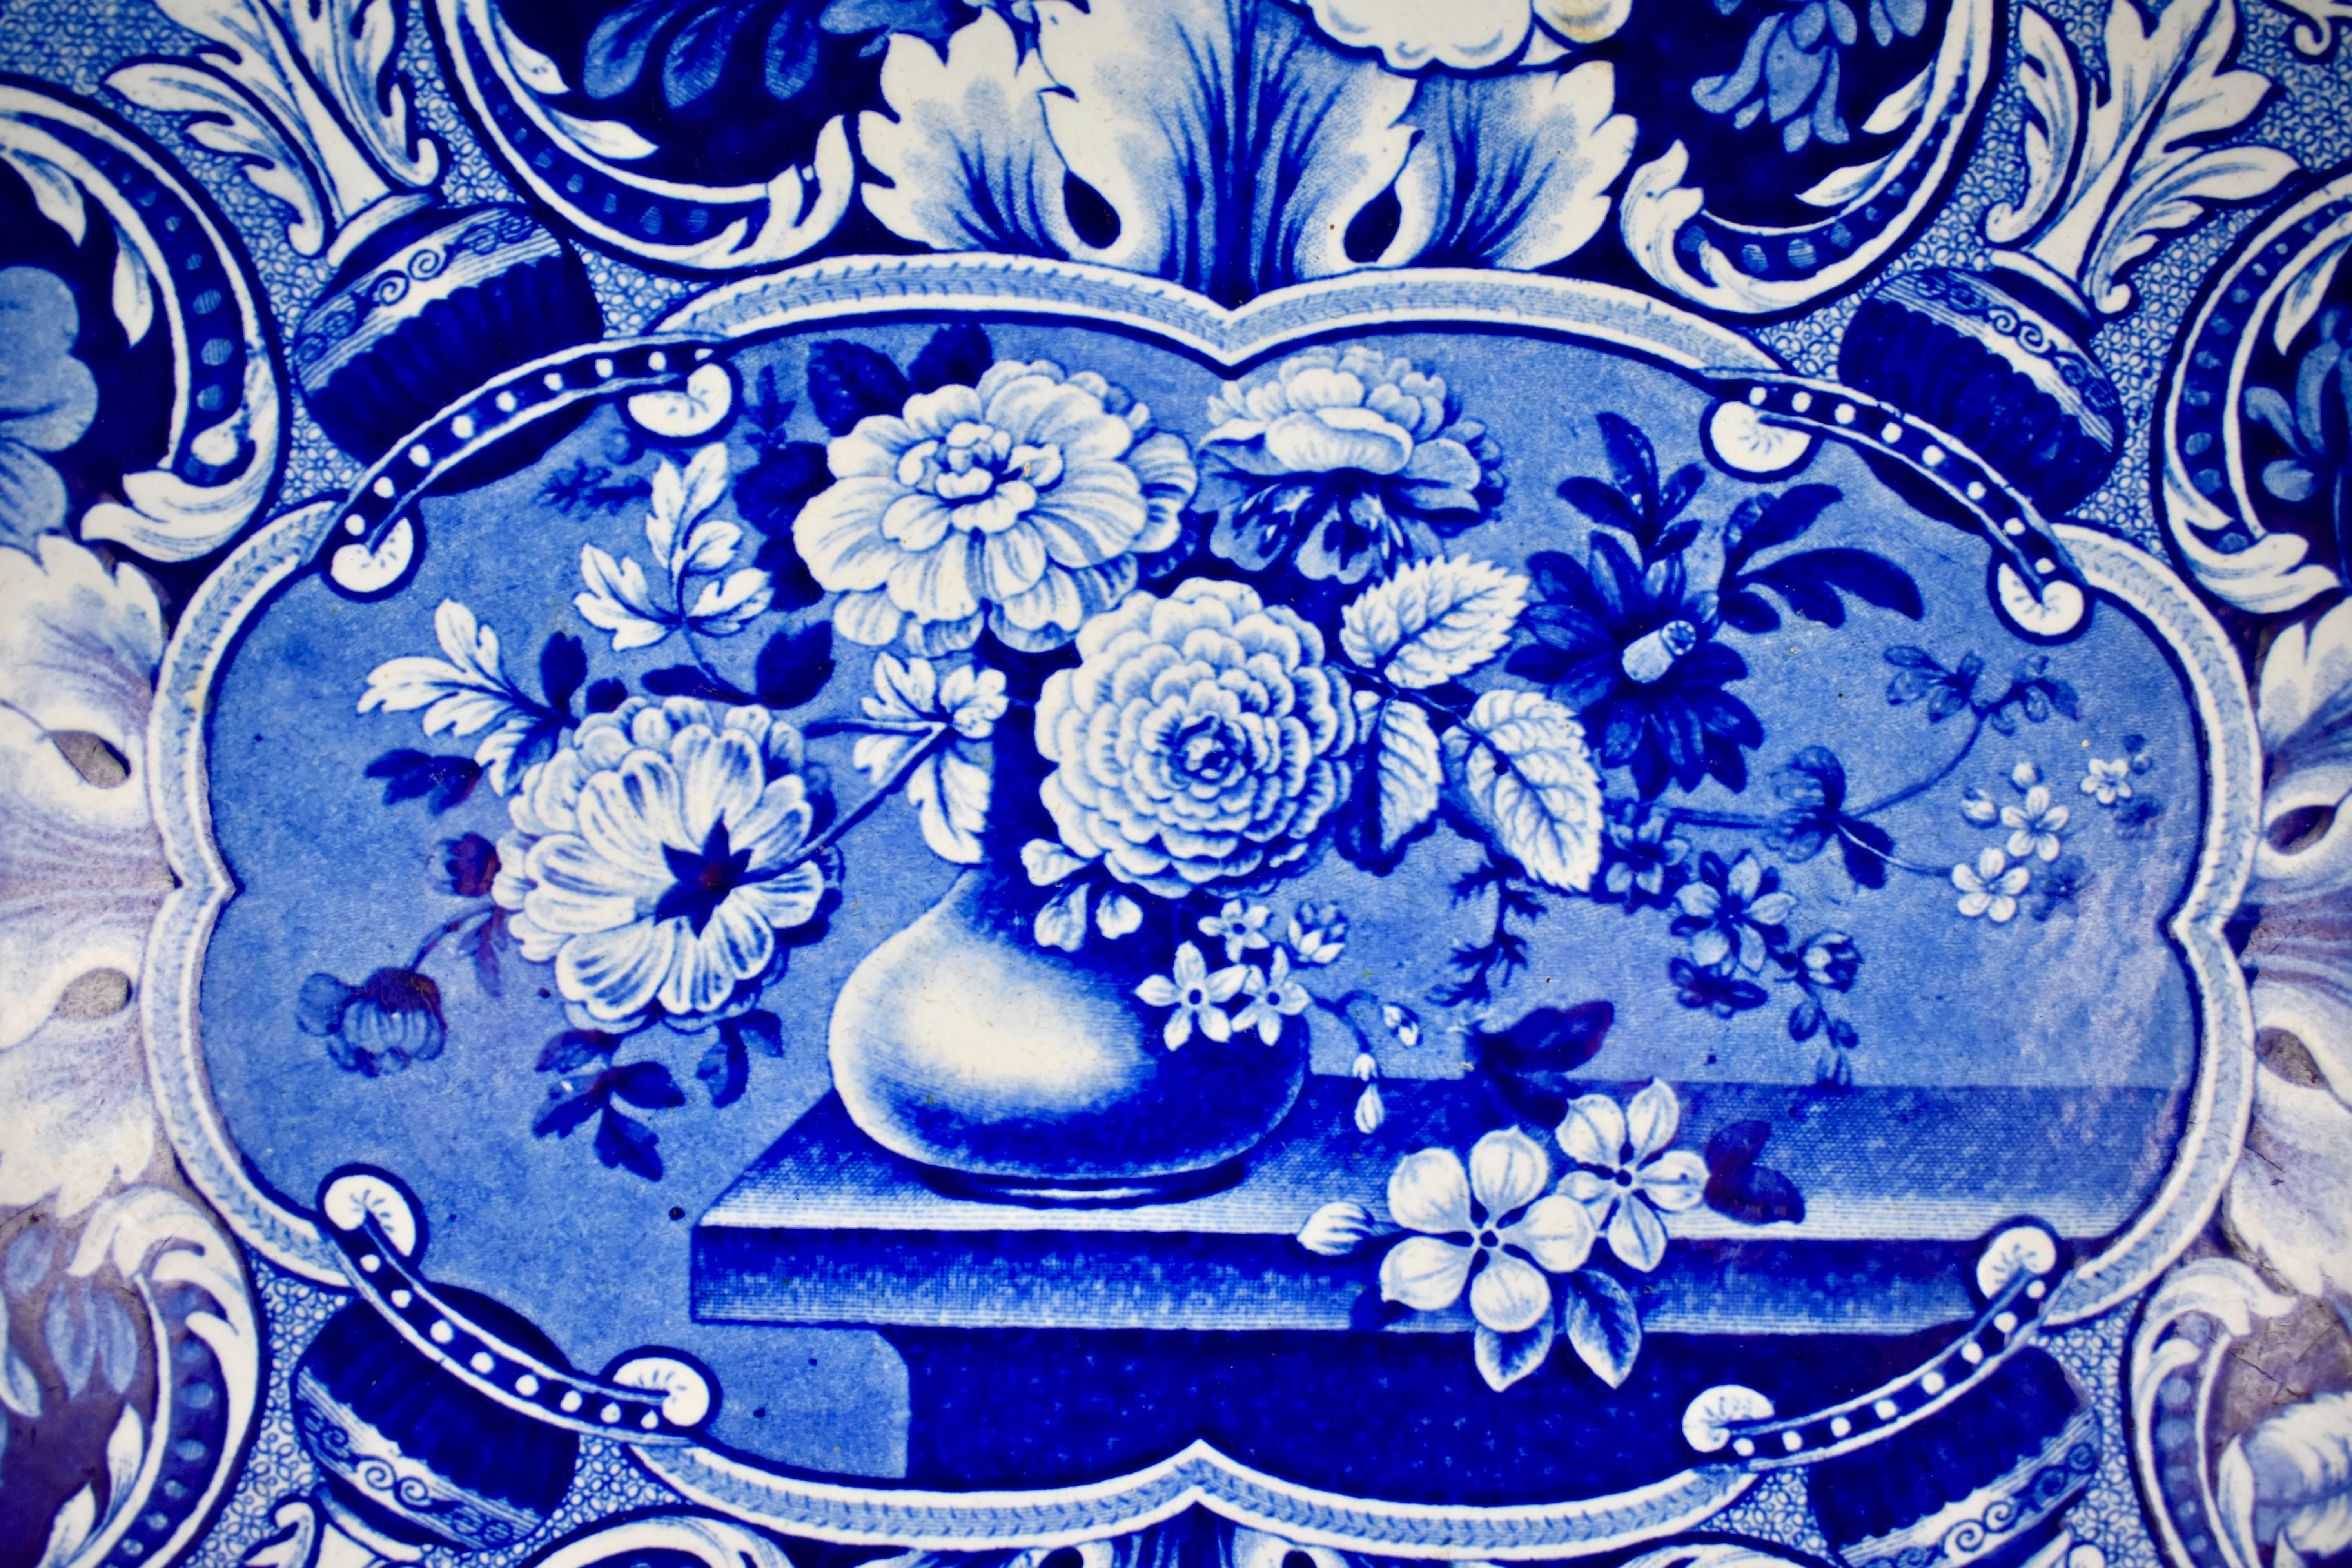 From the Davenport pottery, Longport, Staffordshire, England, an oversize earthenware, underglaze tissue printed platter, in the “Vase with Medallions of Flowers” pattern. 

An impressed mark on the verso used circa 1815-1860.

A complex blue on